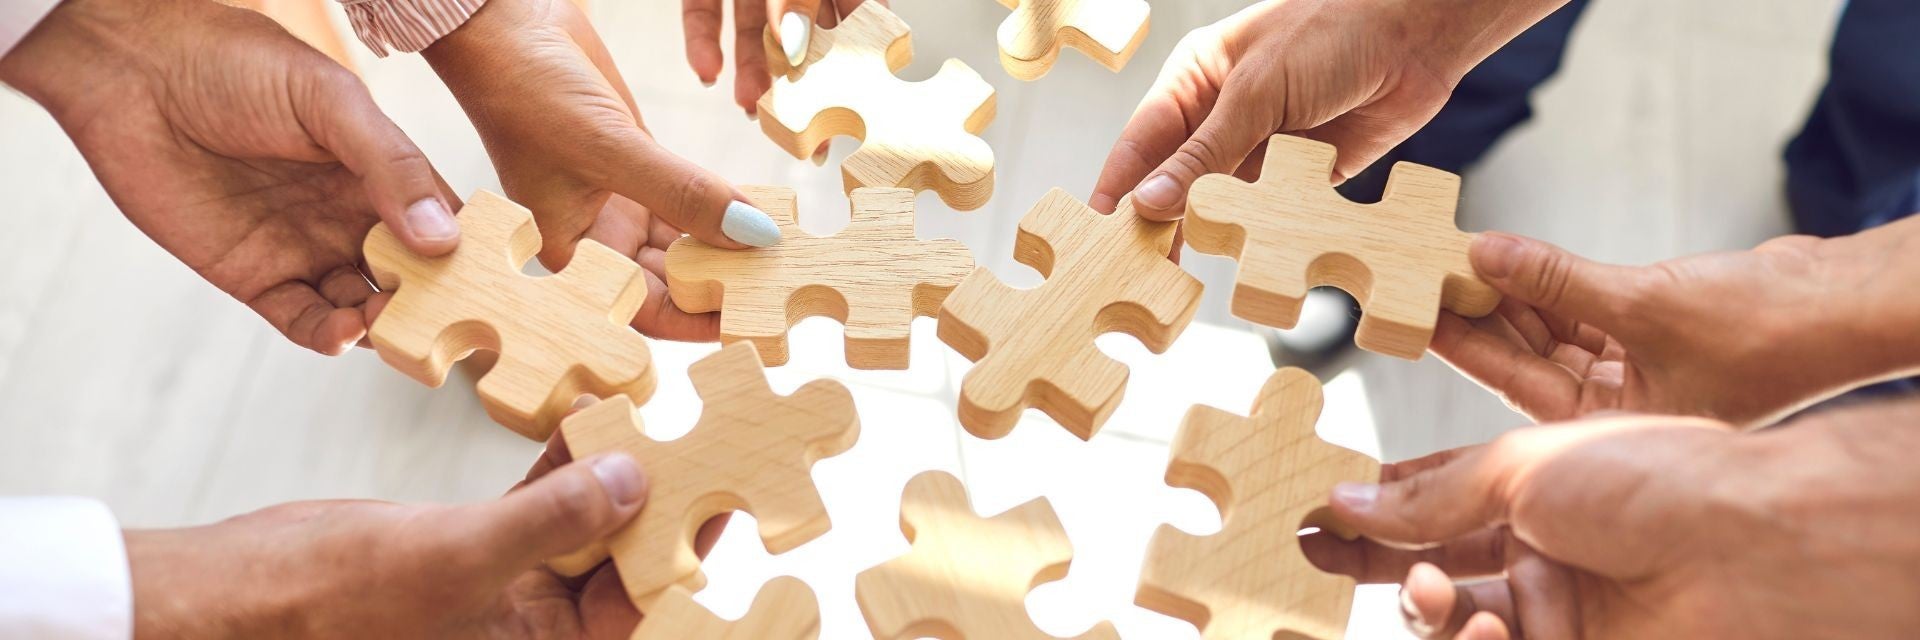 Image of hands linking puzzel pieces